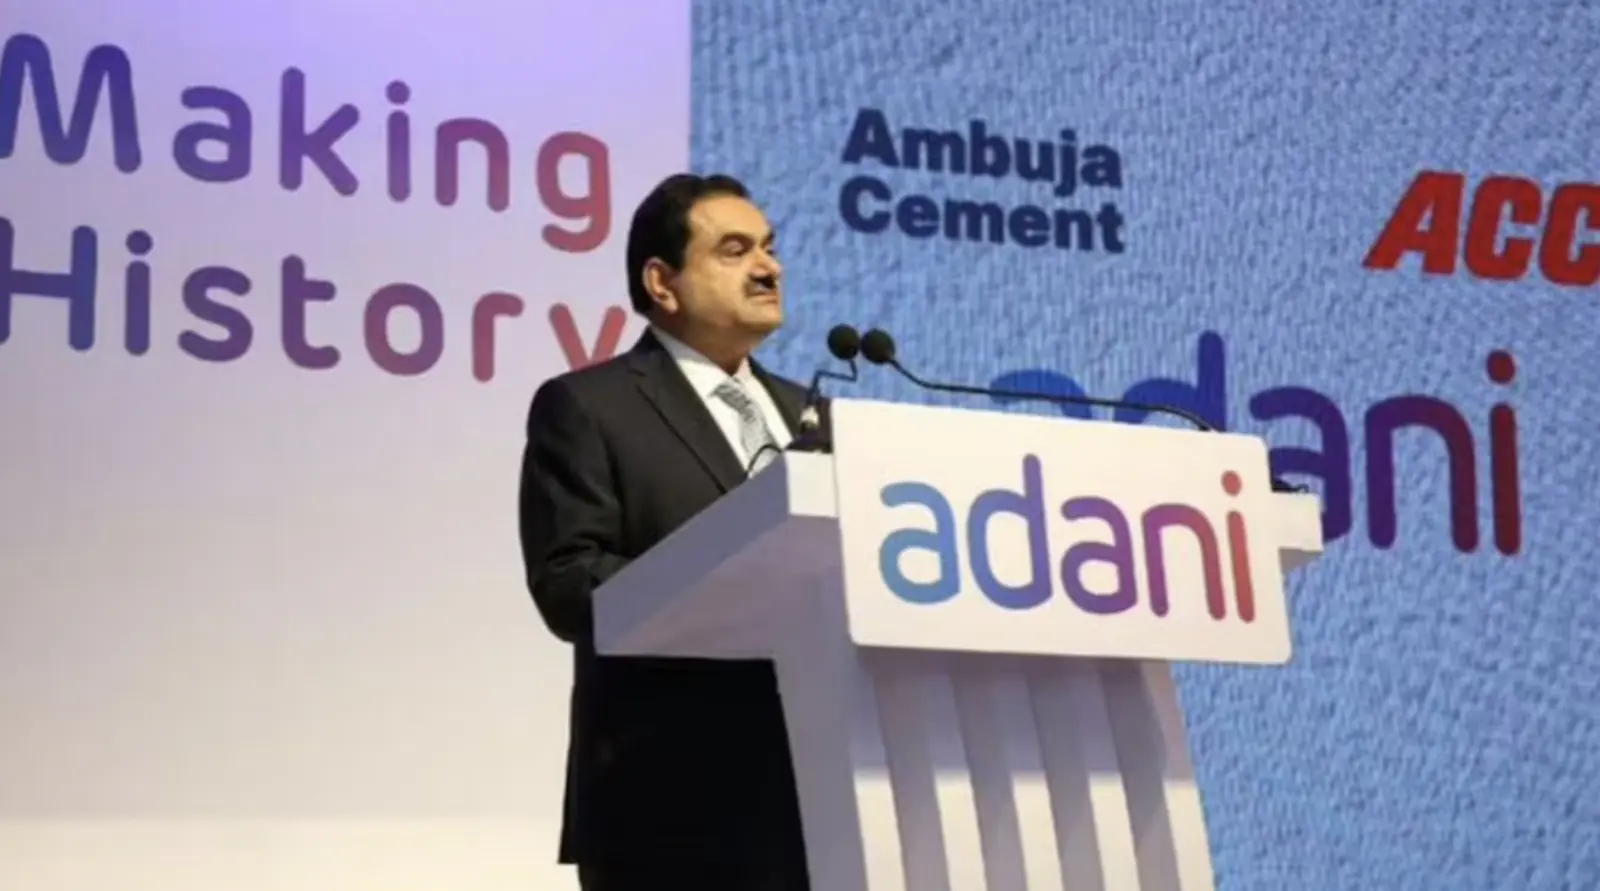 Adani Group will invest 1.2 lakh crore rupees in the upcoming fiscal year, according to Gautam Adani